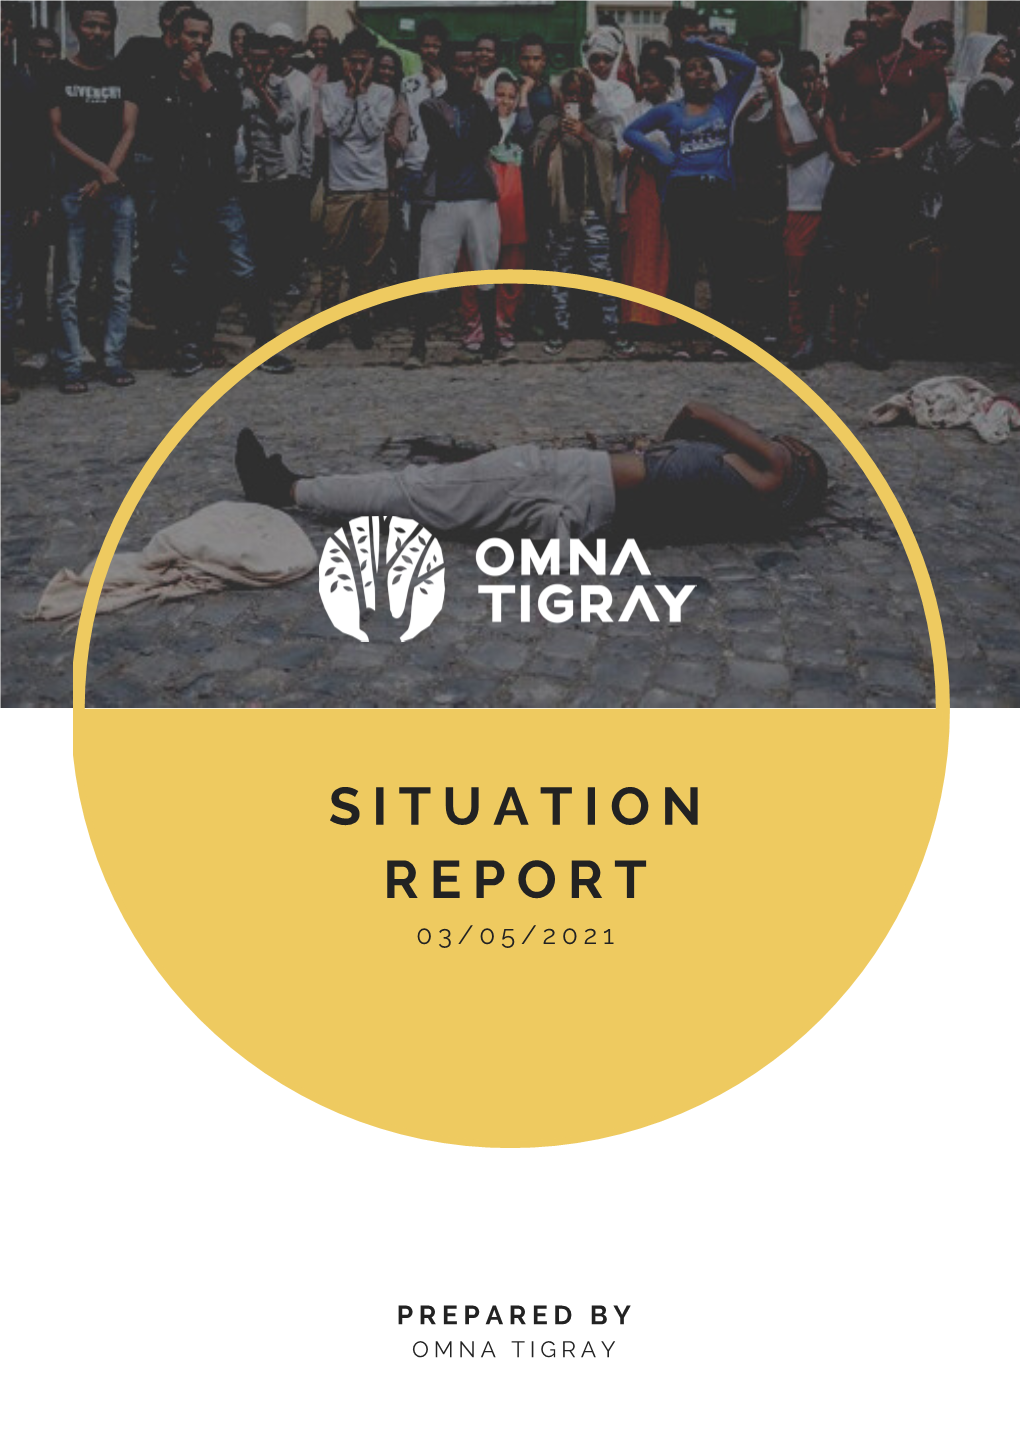 Read Full Situation Report…